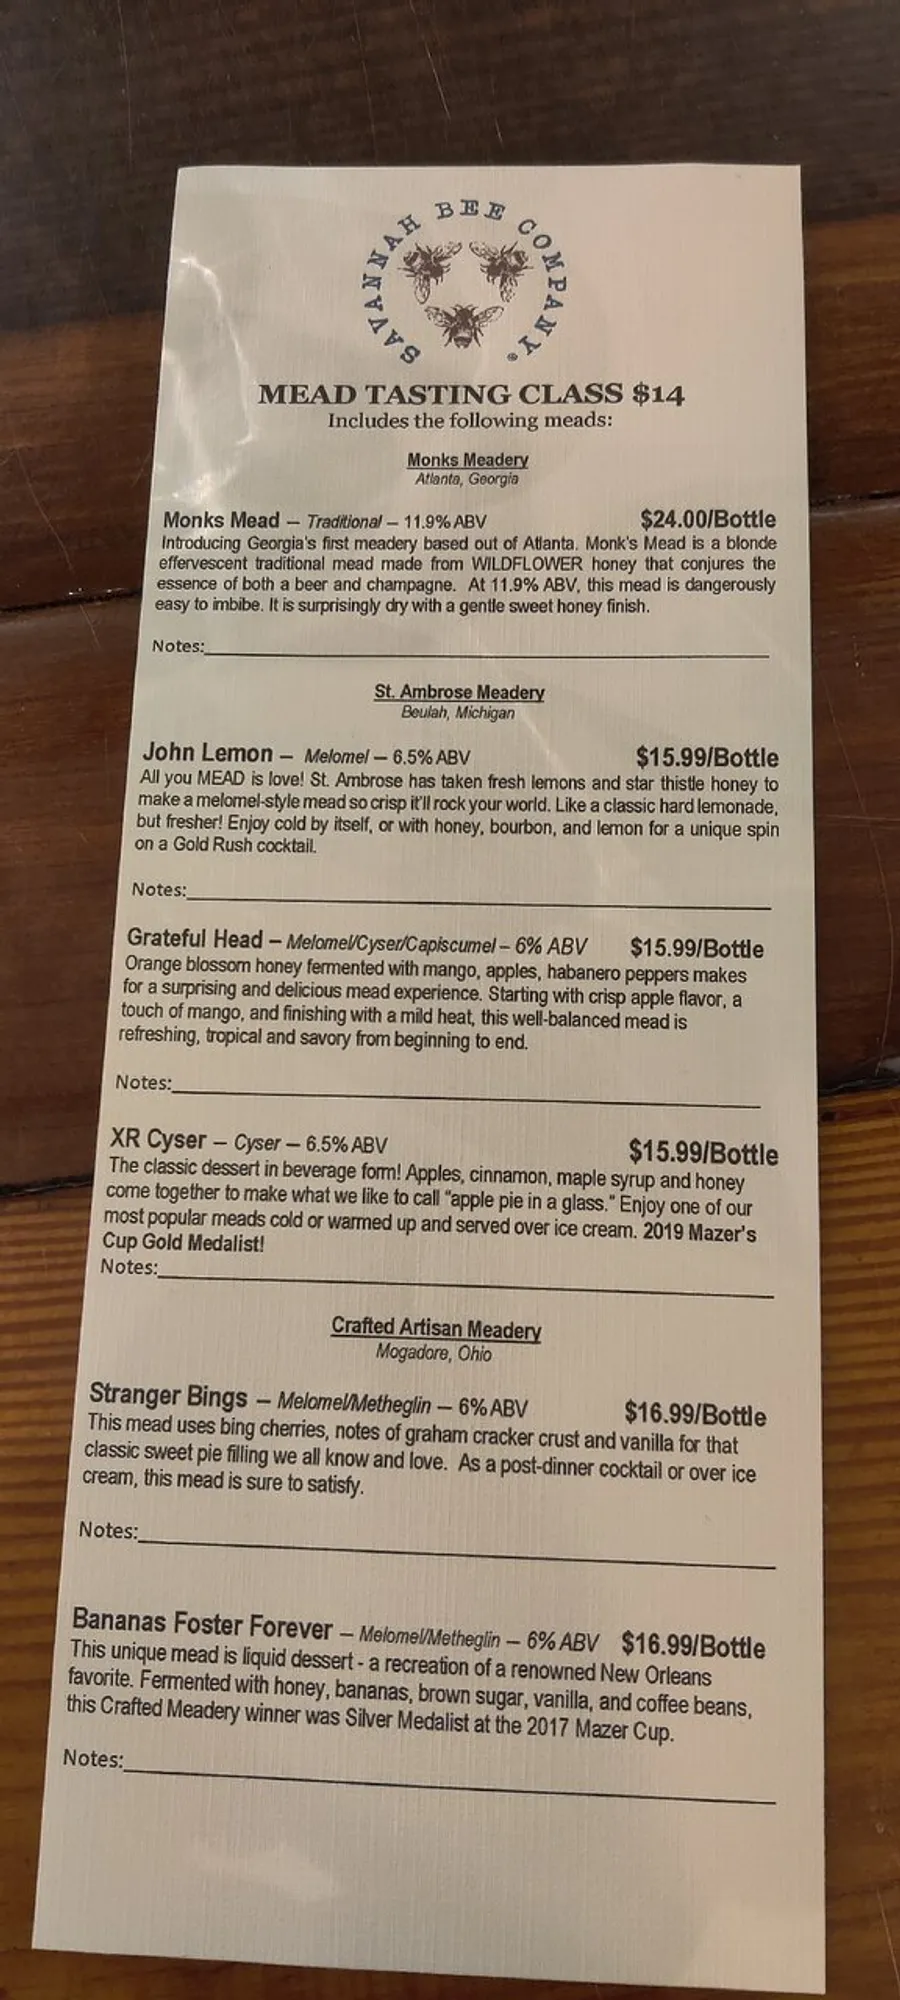 The image shows a menu for a mead tasting class, listing various meads with descriptions, alcohol content, and prices per bottle from different meaderies.